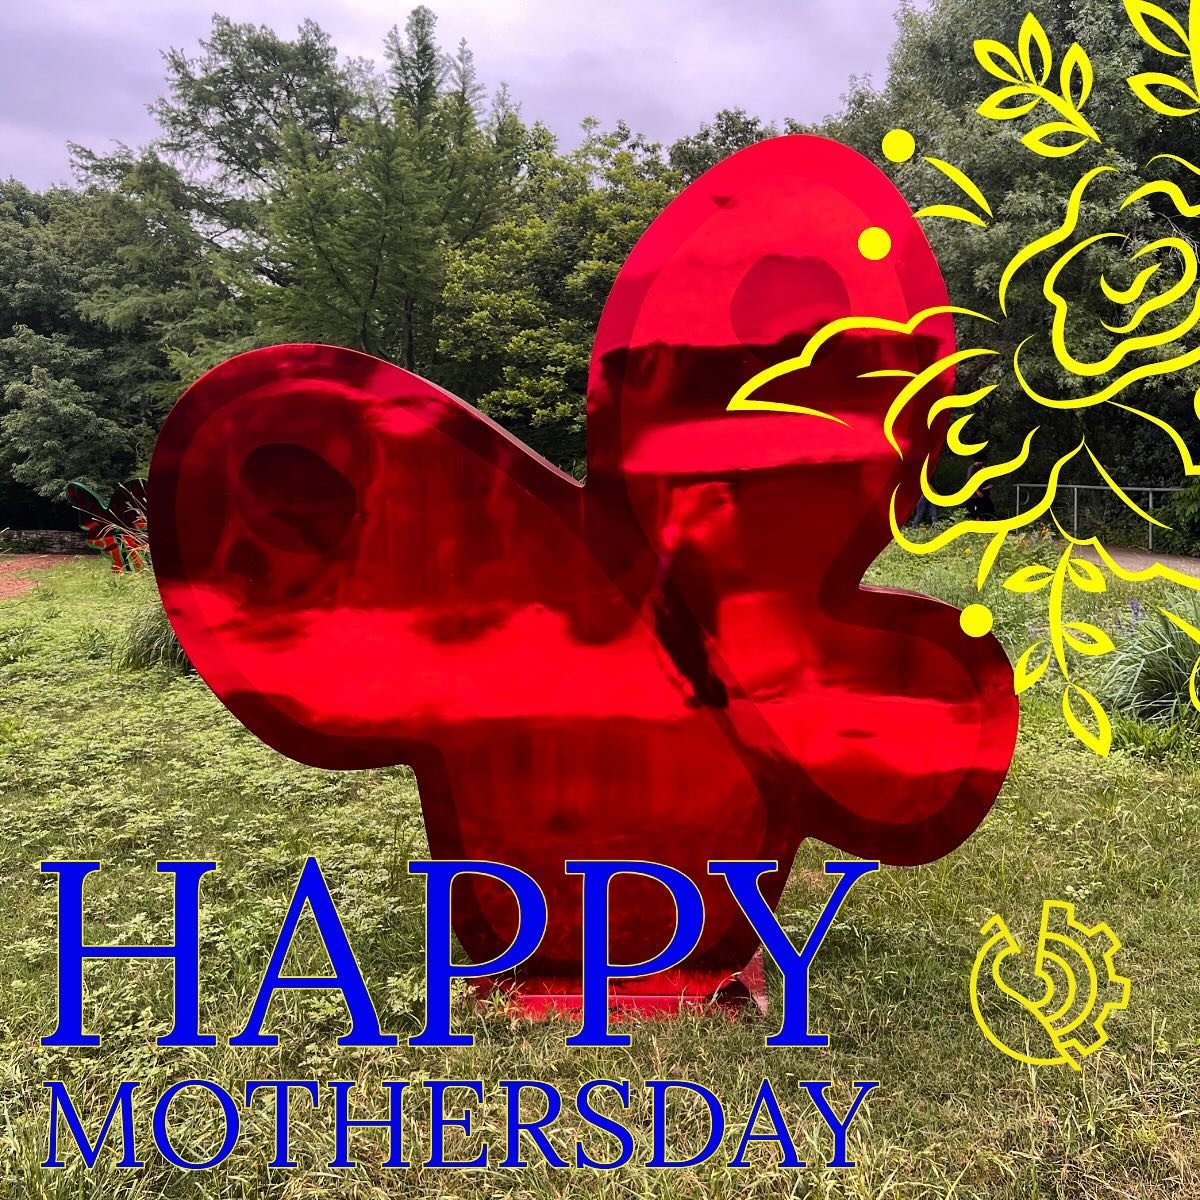 💐To all who nurture and mother all year long, may you have time and space to fill your cup today💞

@boutiquebodyworks 
Access the Toolbox at: www.boutiquebodyworks.com
YouTube Free at Boutique Bodyworks 
 #lifestylemedicine #holisticwellness #whole